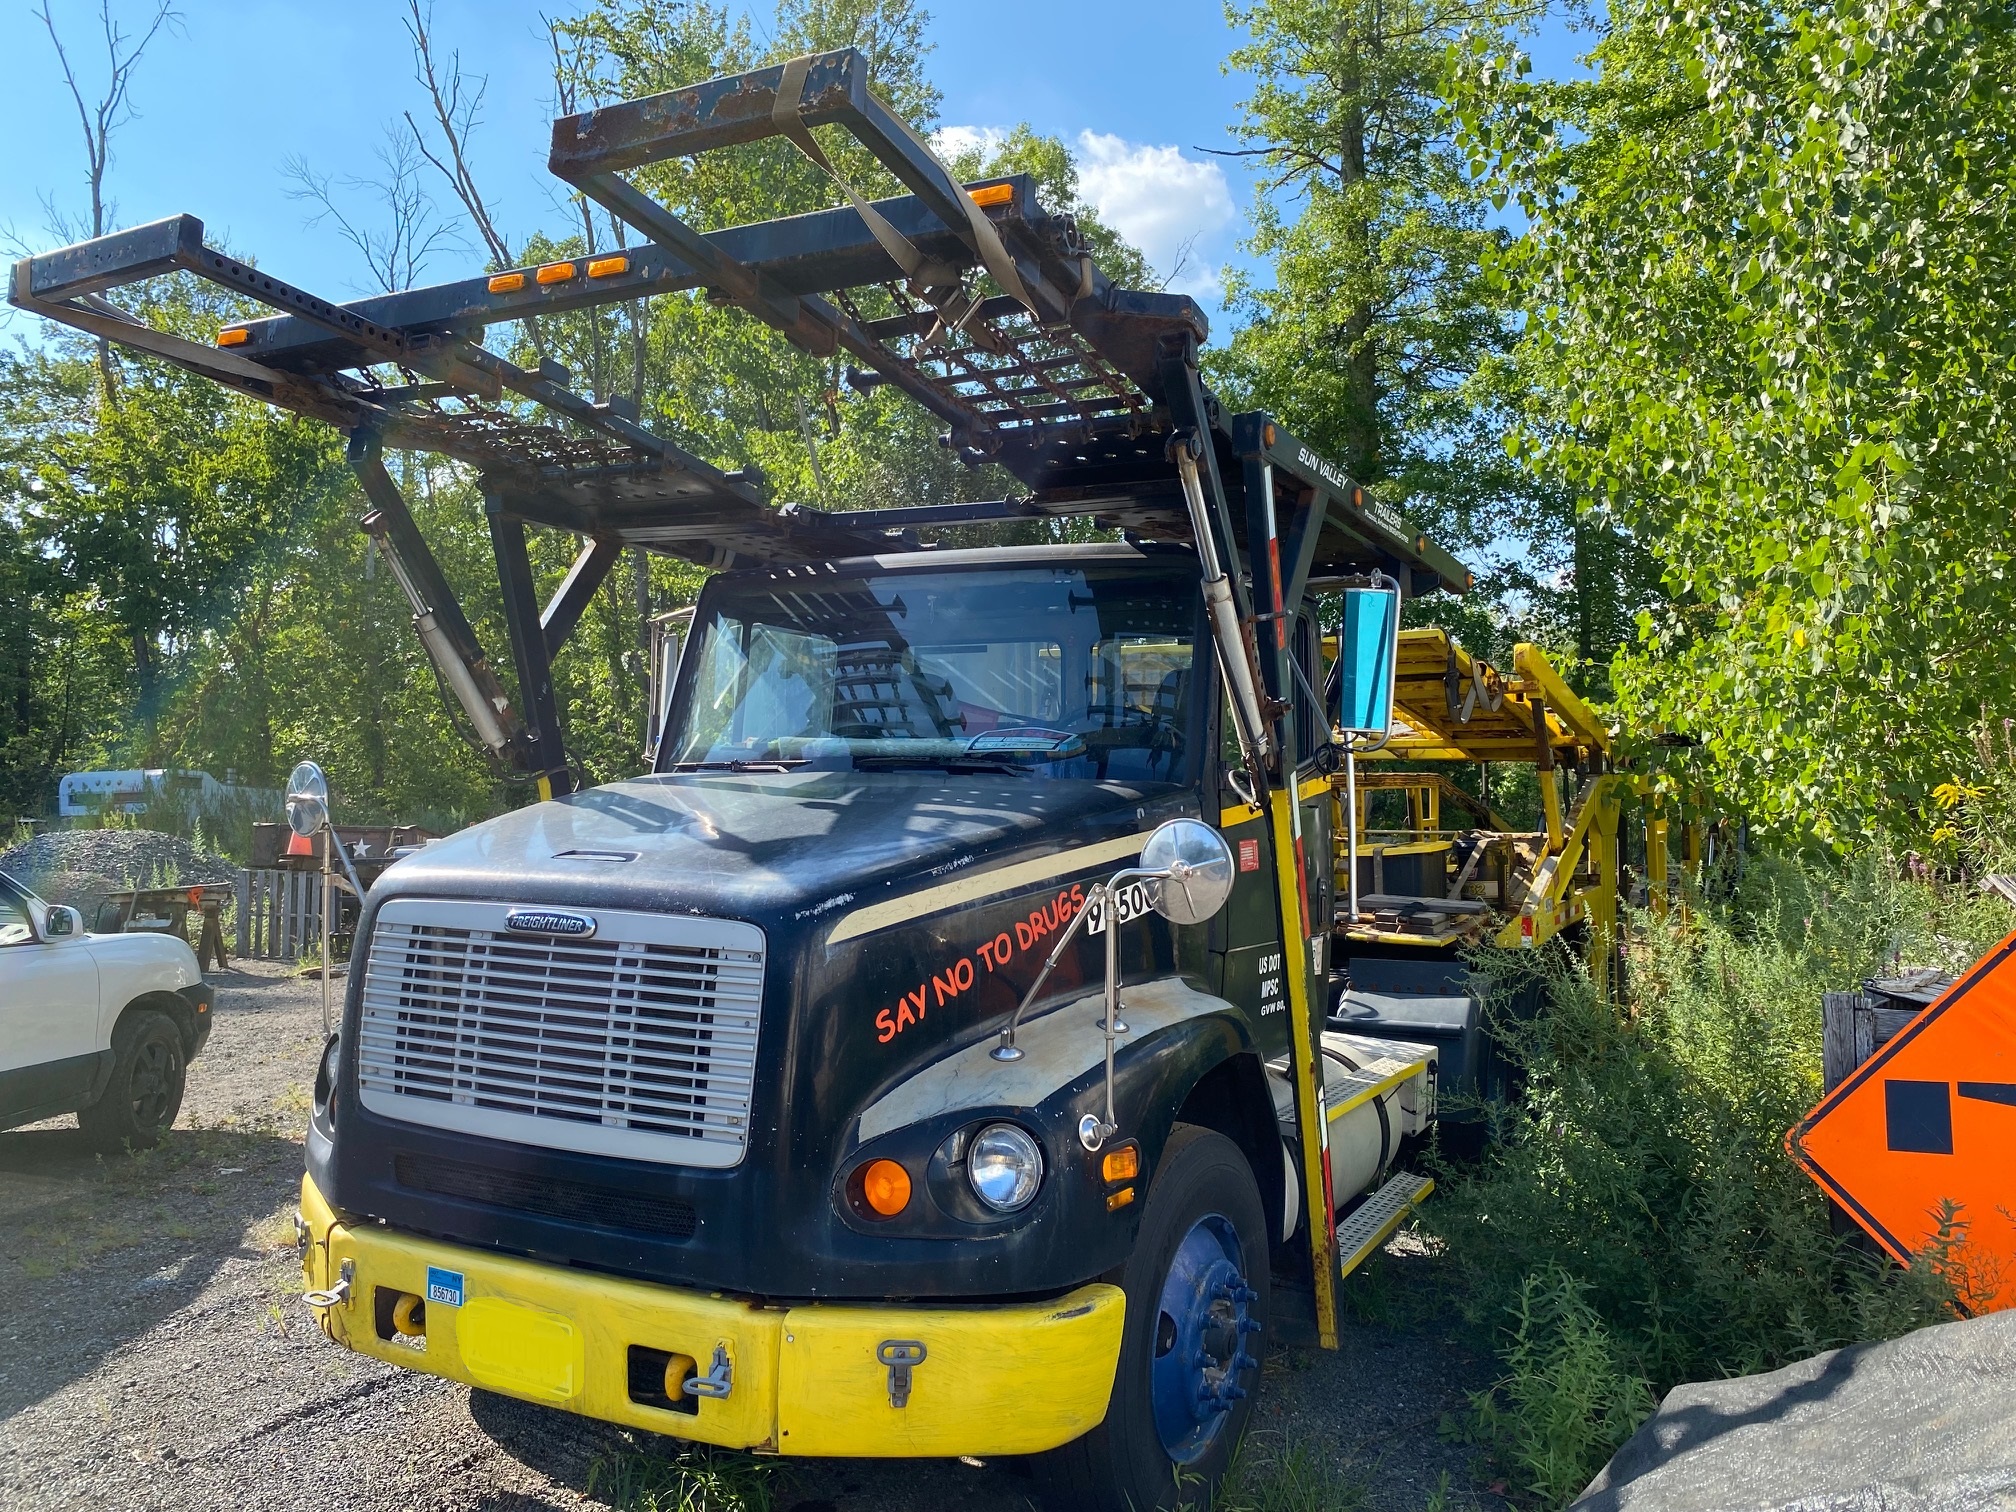 Freightliner auto transport truck. Year 2000 FL112 semi tractor and a 2006 auto transport trailer. The truck has the Caterpillar C12 6 cylinder engine with 500k miles and recently overhauled with a 10 speed transmission and new steer and trailer tires. Ready to haul.